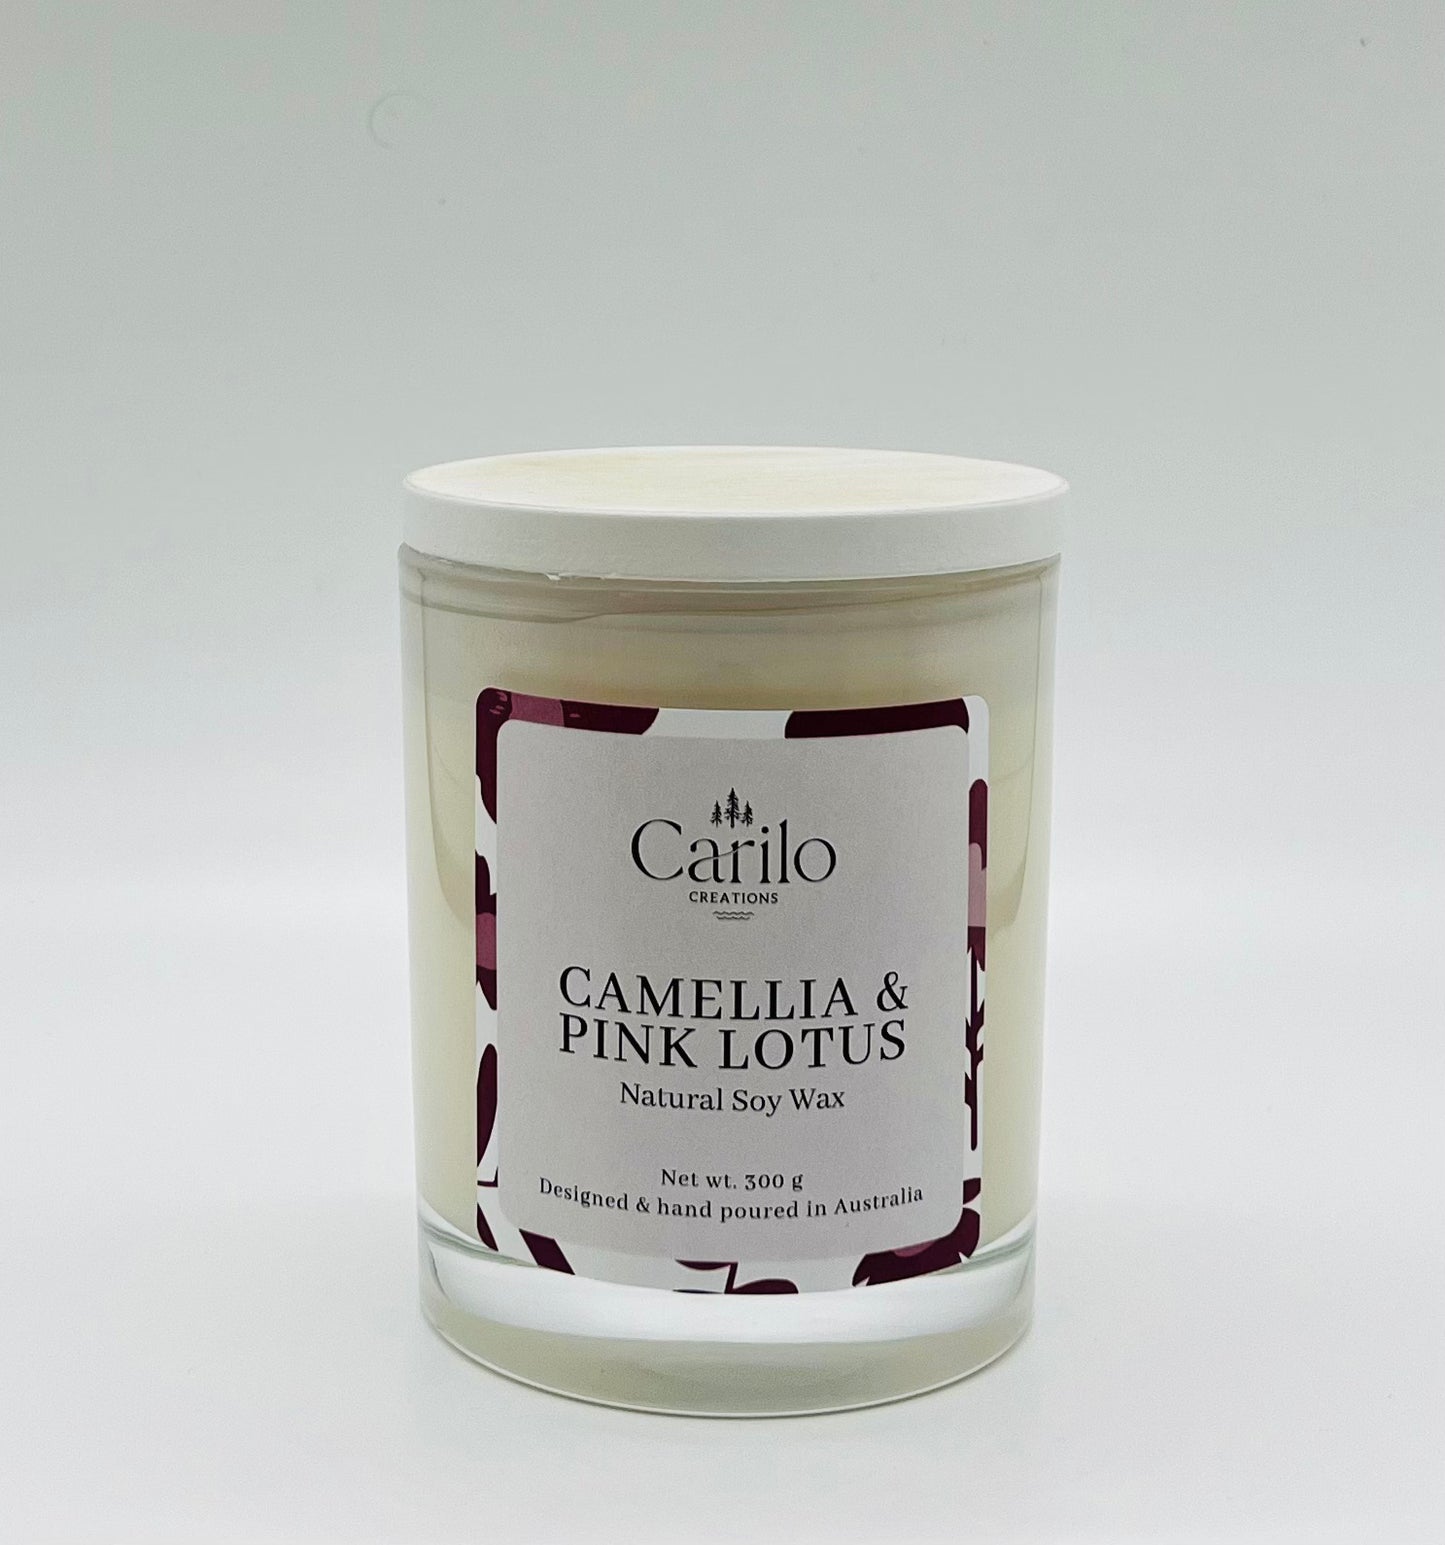 CAMELLIA & PINK LOTUS SCENTED CANDLE - 300g